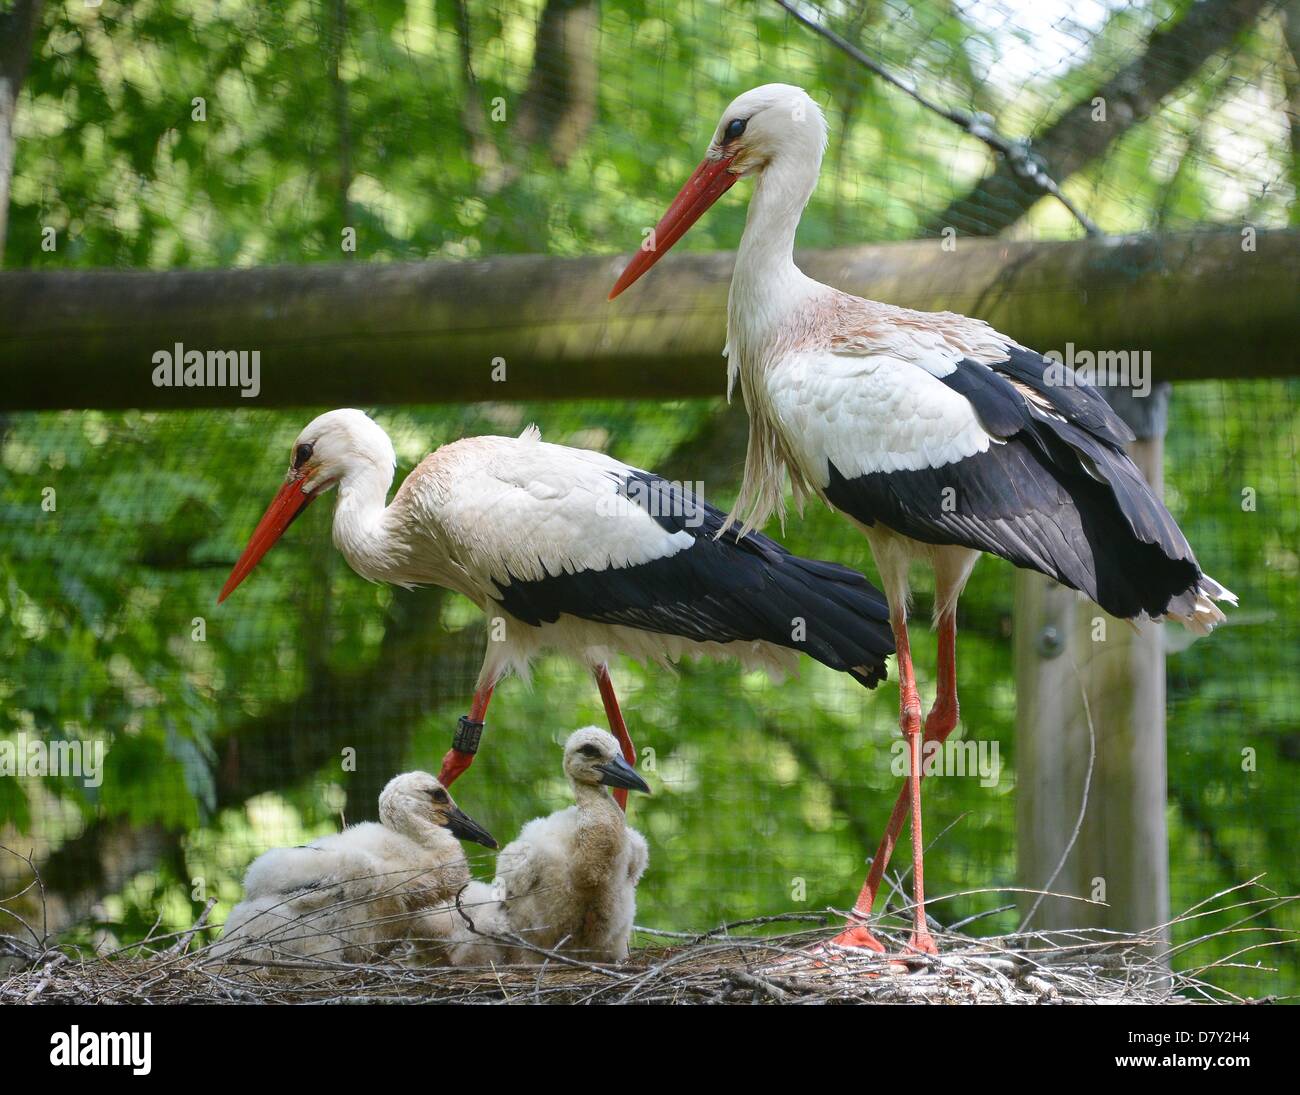 Three stork offsprings wait for food at the animal park Wildparadies Tripsdrill in Cleebronn, Germany, 15 May 2013.  Photo: BERND WEISSBROD Stock Photo